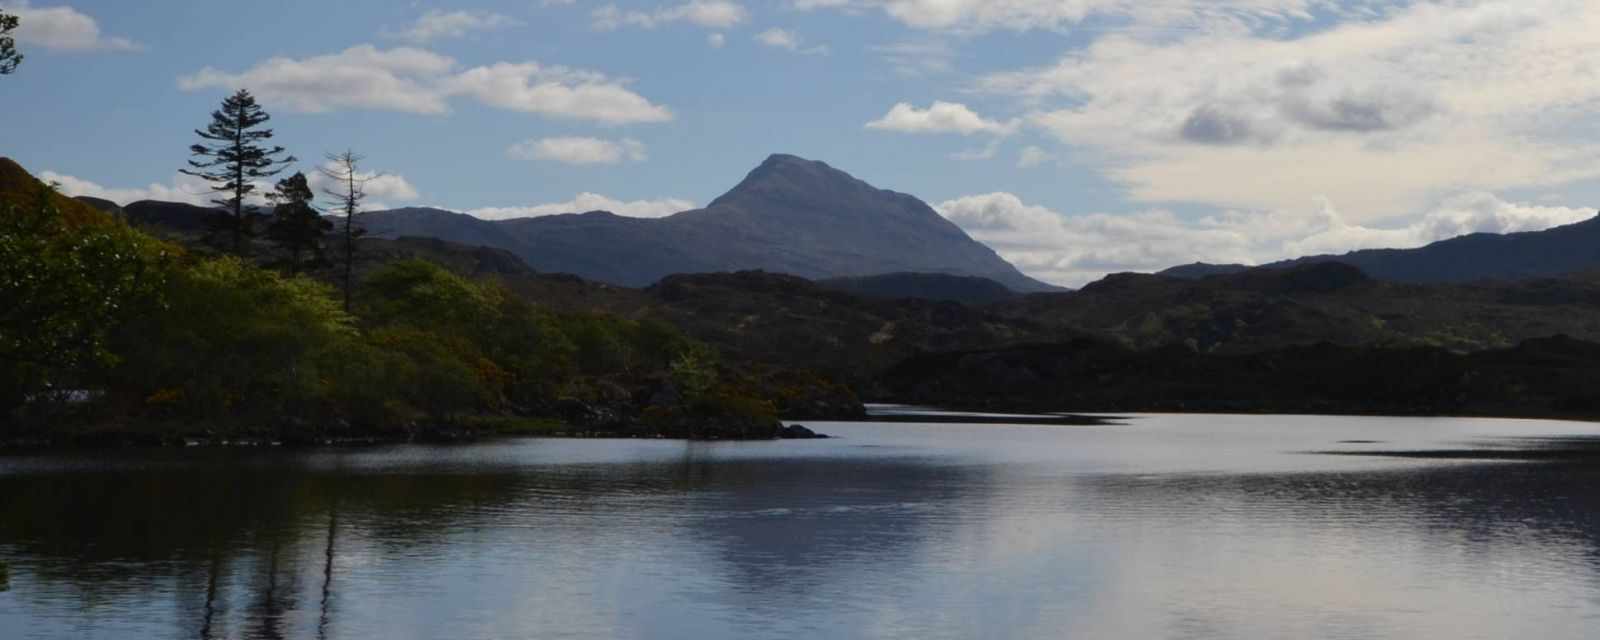 Canisp One of the Spectacular Assynt Hills